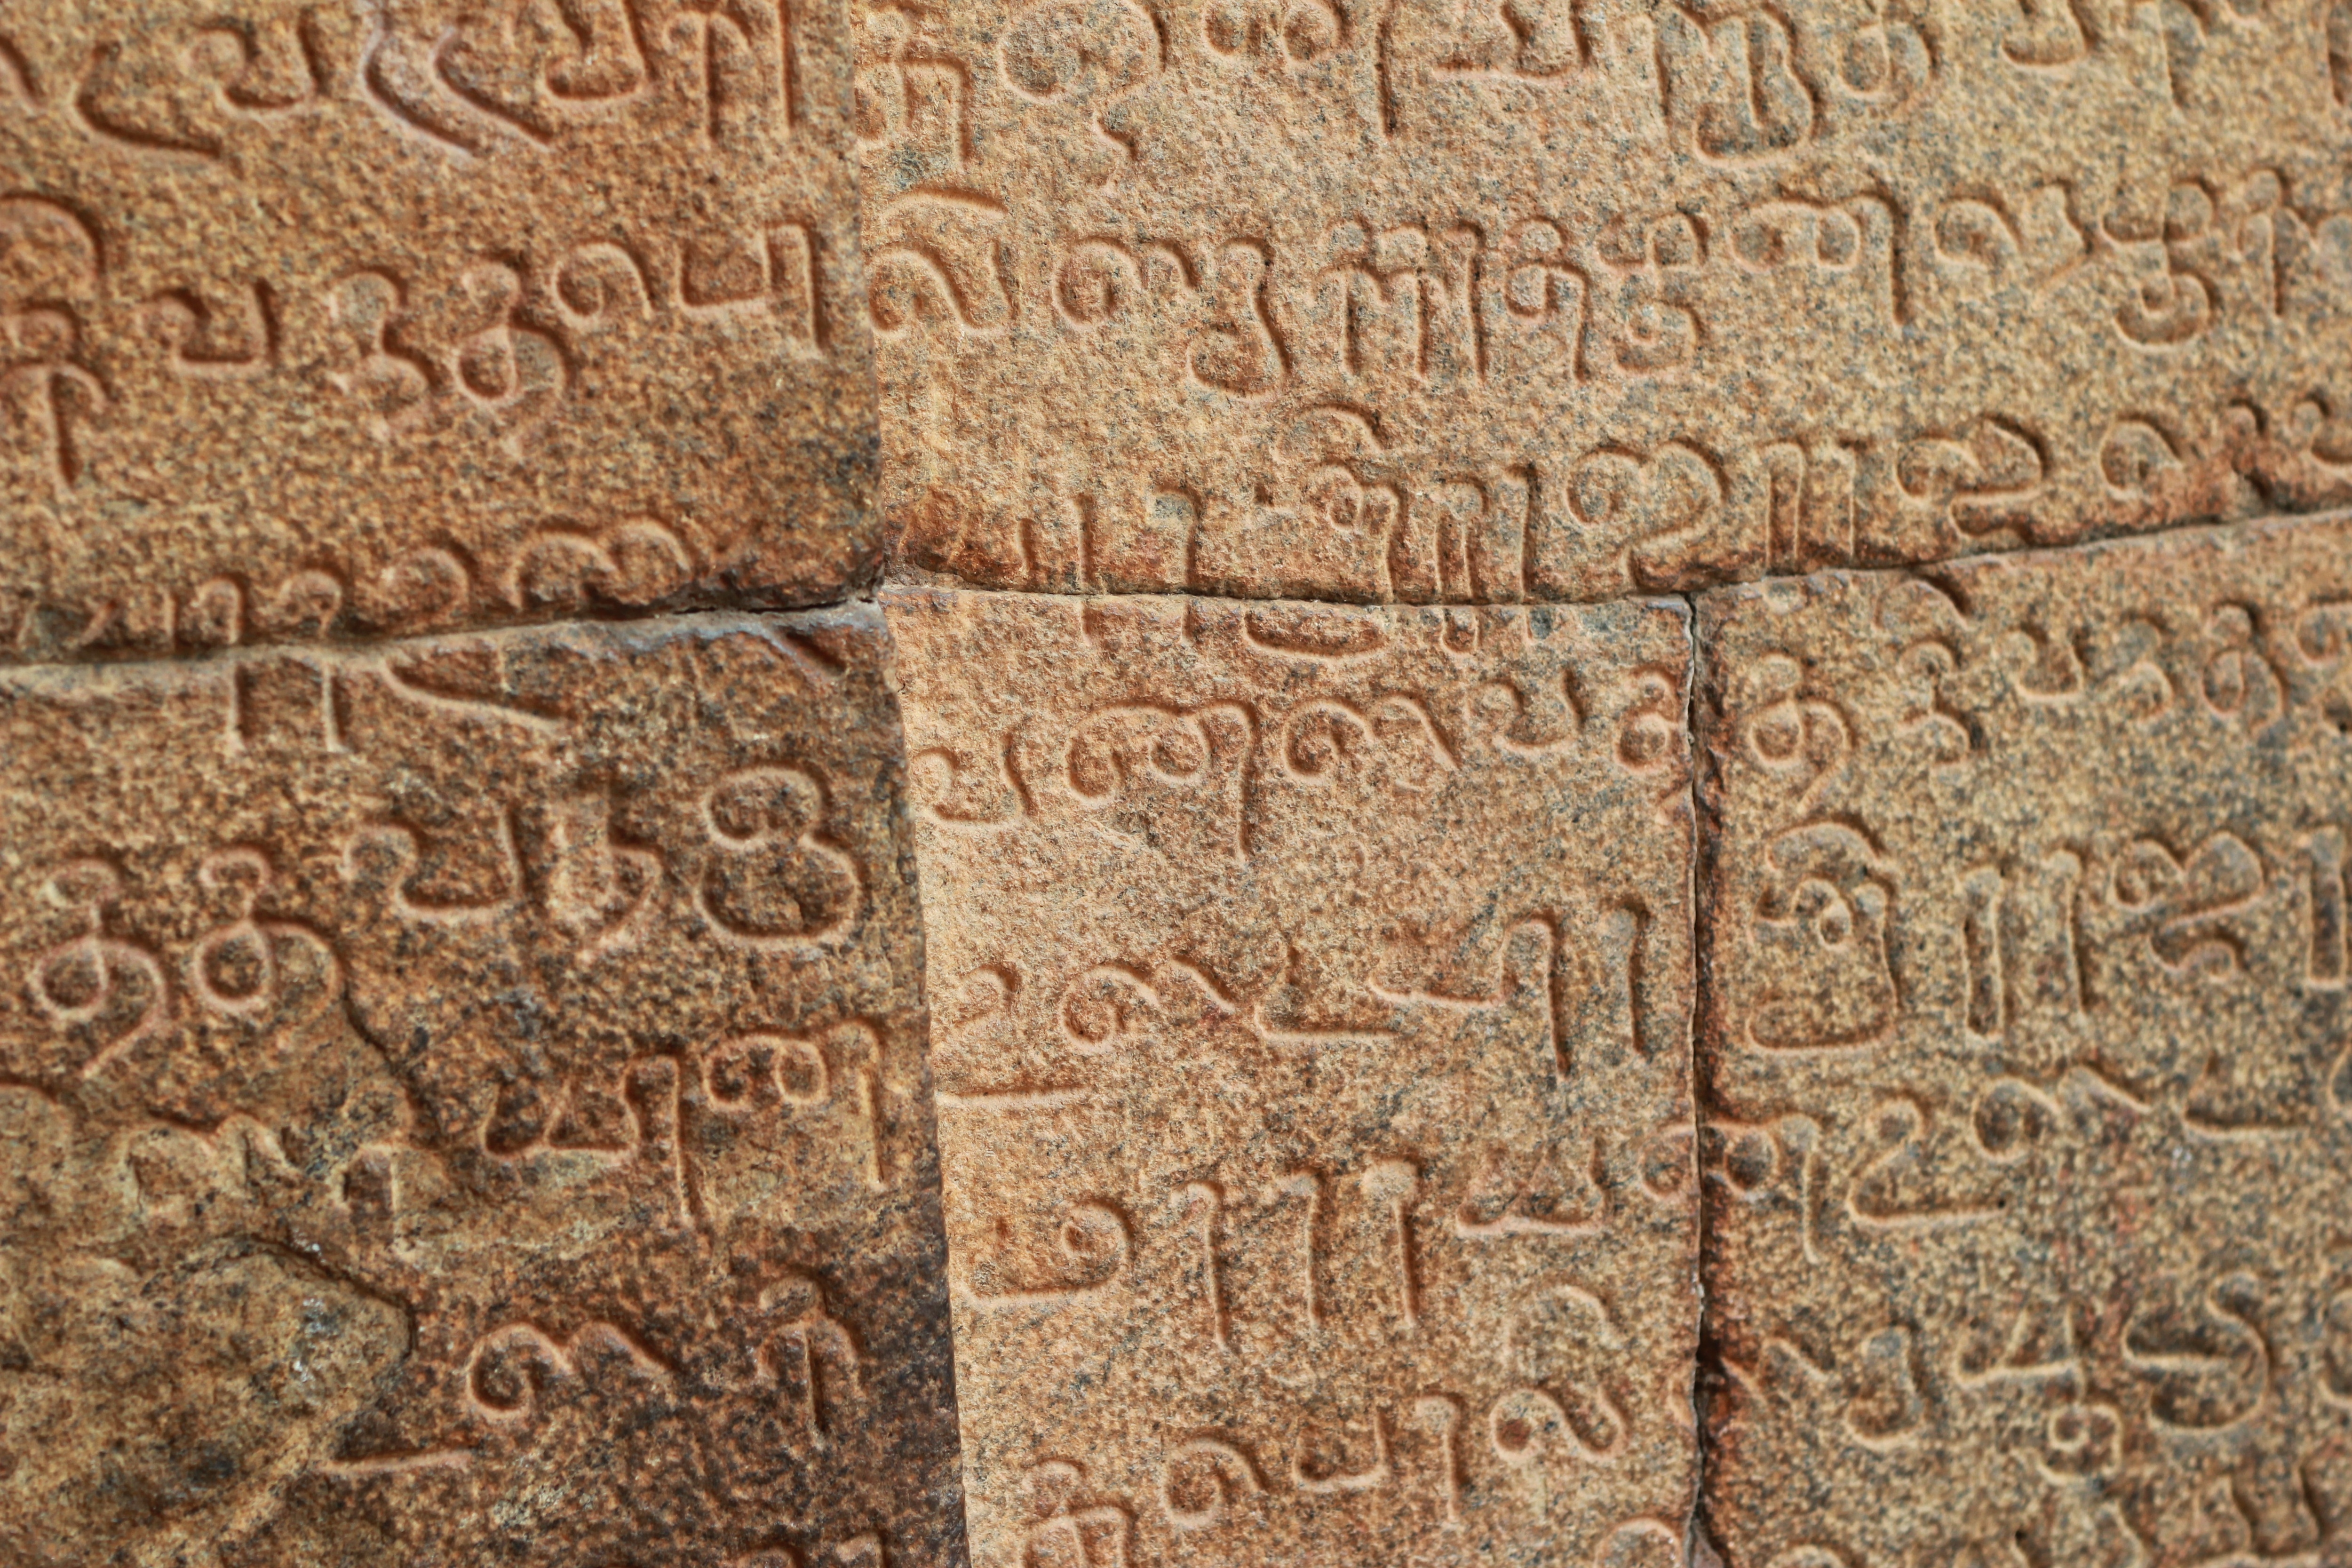 Indeed, medieval South Indians’ interest in producing elite literature in their own language, based on advanced linguistic and aesthetic ideas, was unparalleled in the subcontinent’s history.&nbsp;(Shutterstock)